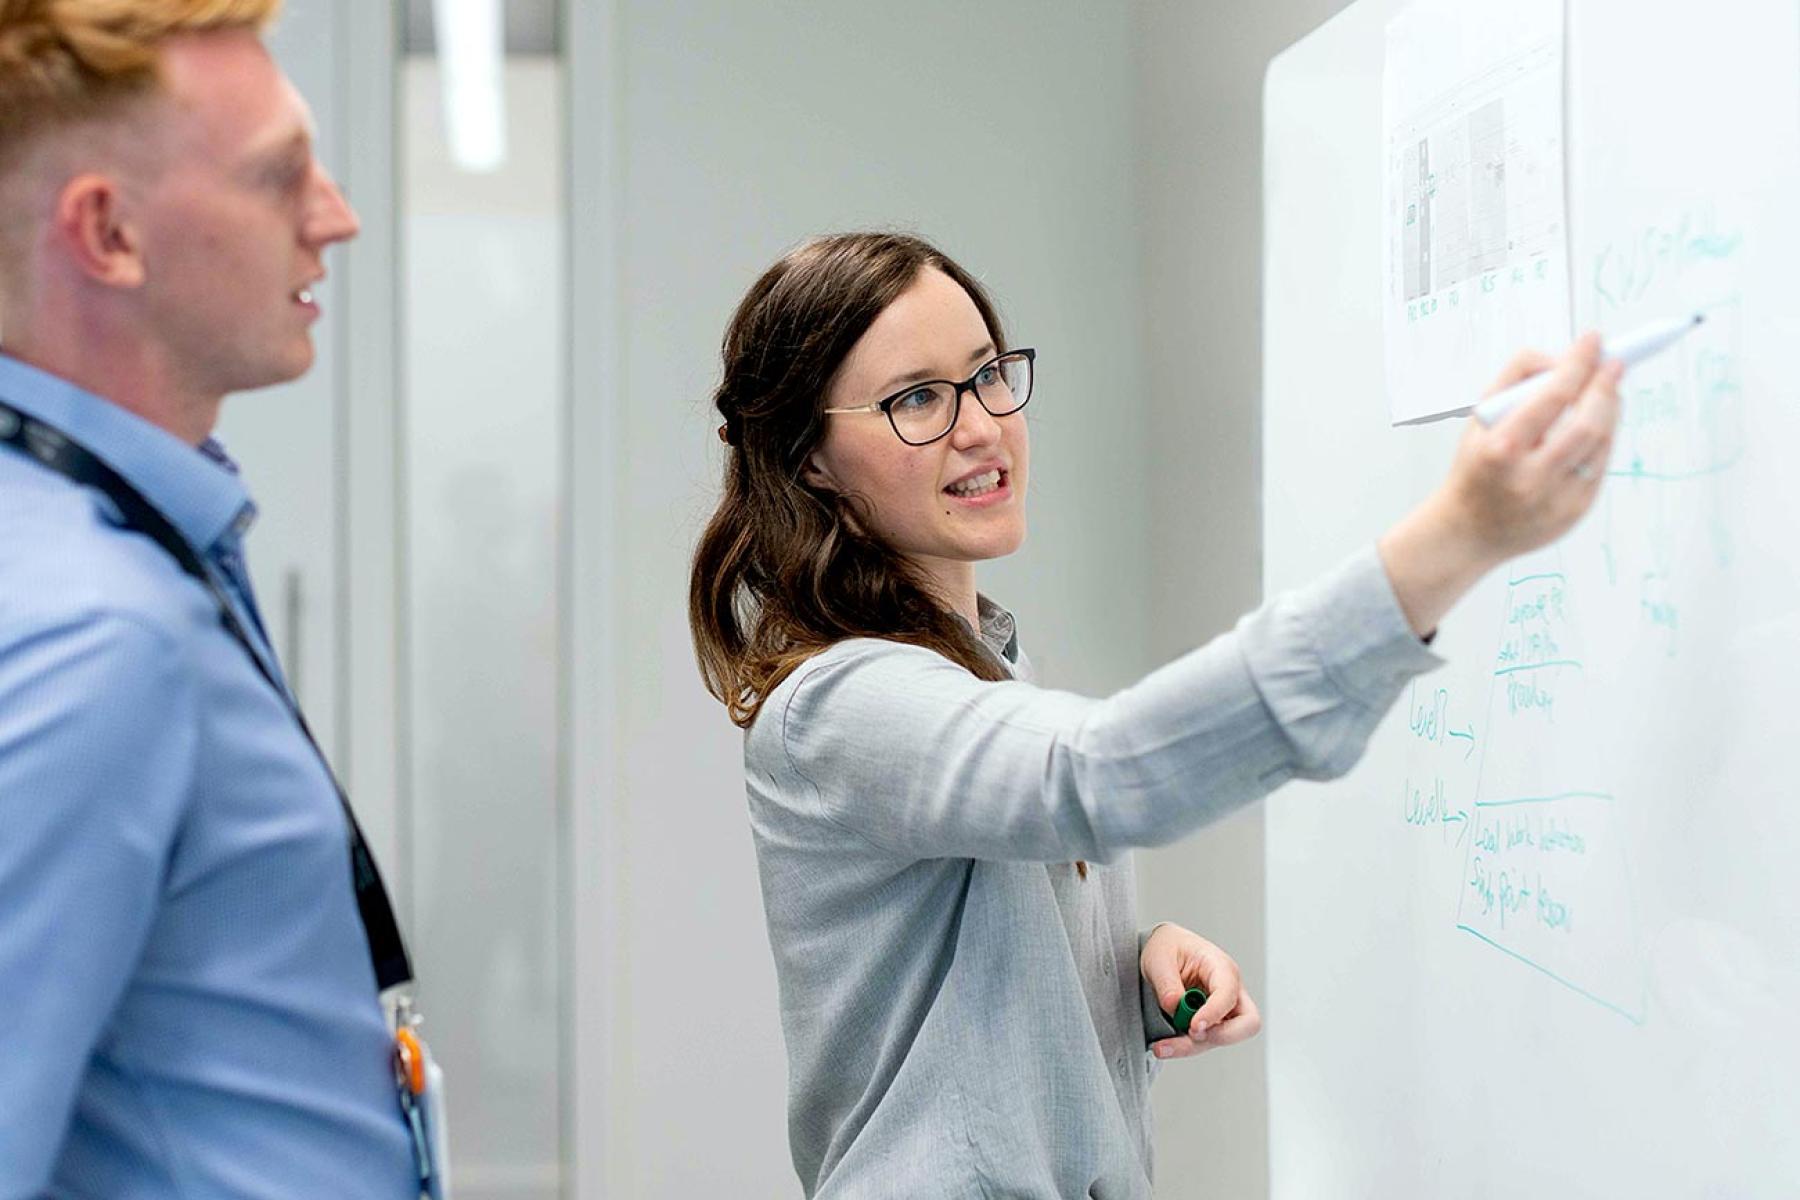 Woman and man doing planning activity in front of whiteboard